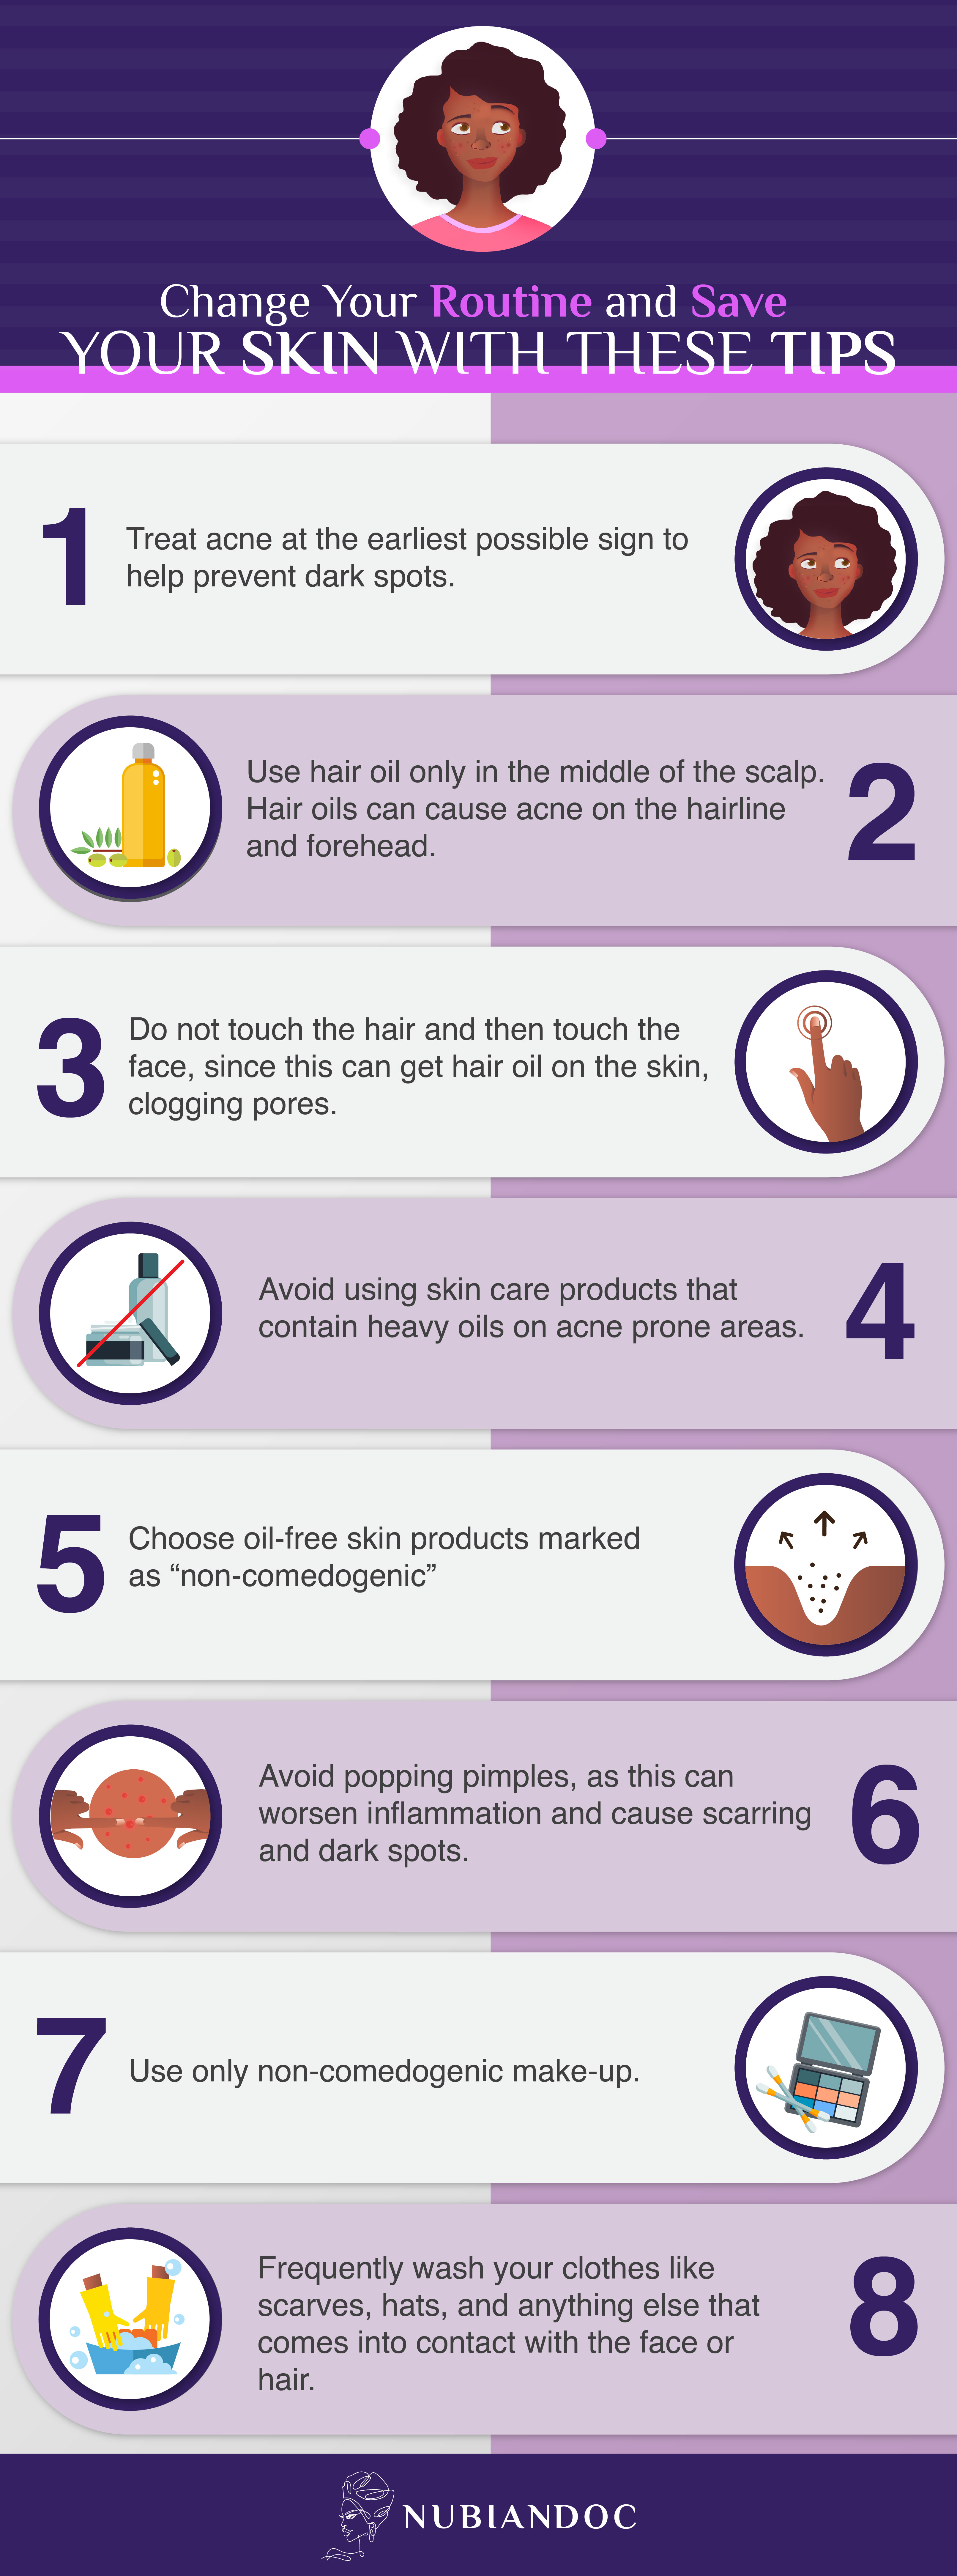 Tips to Fight Acne